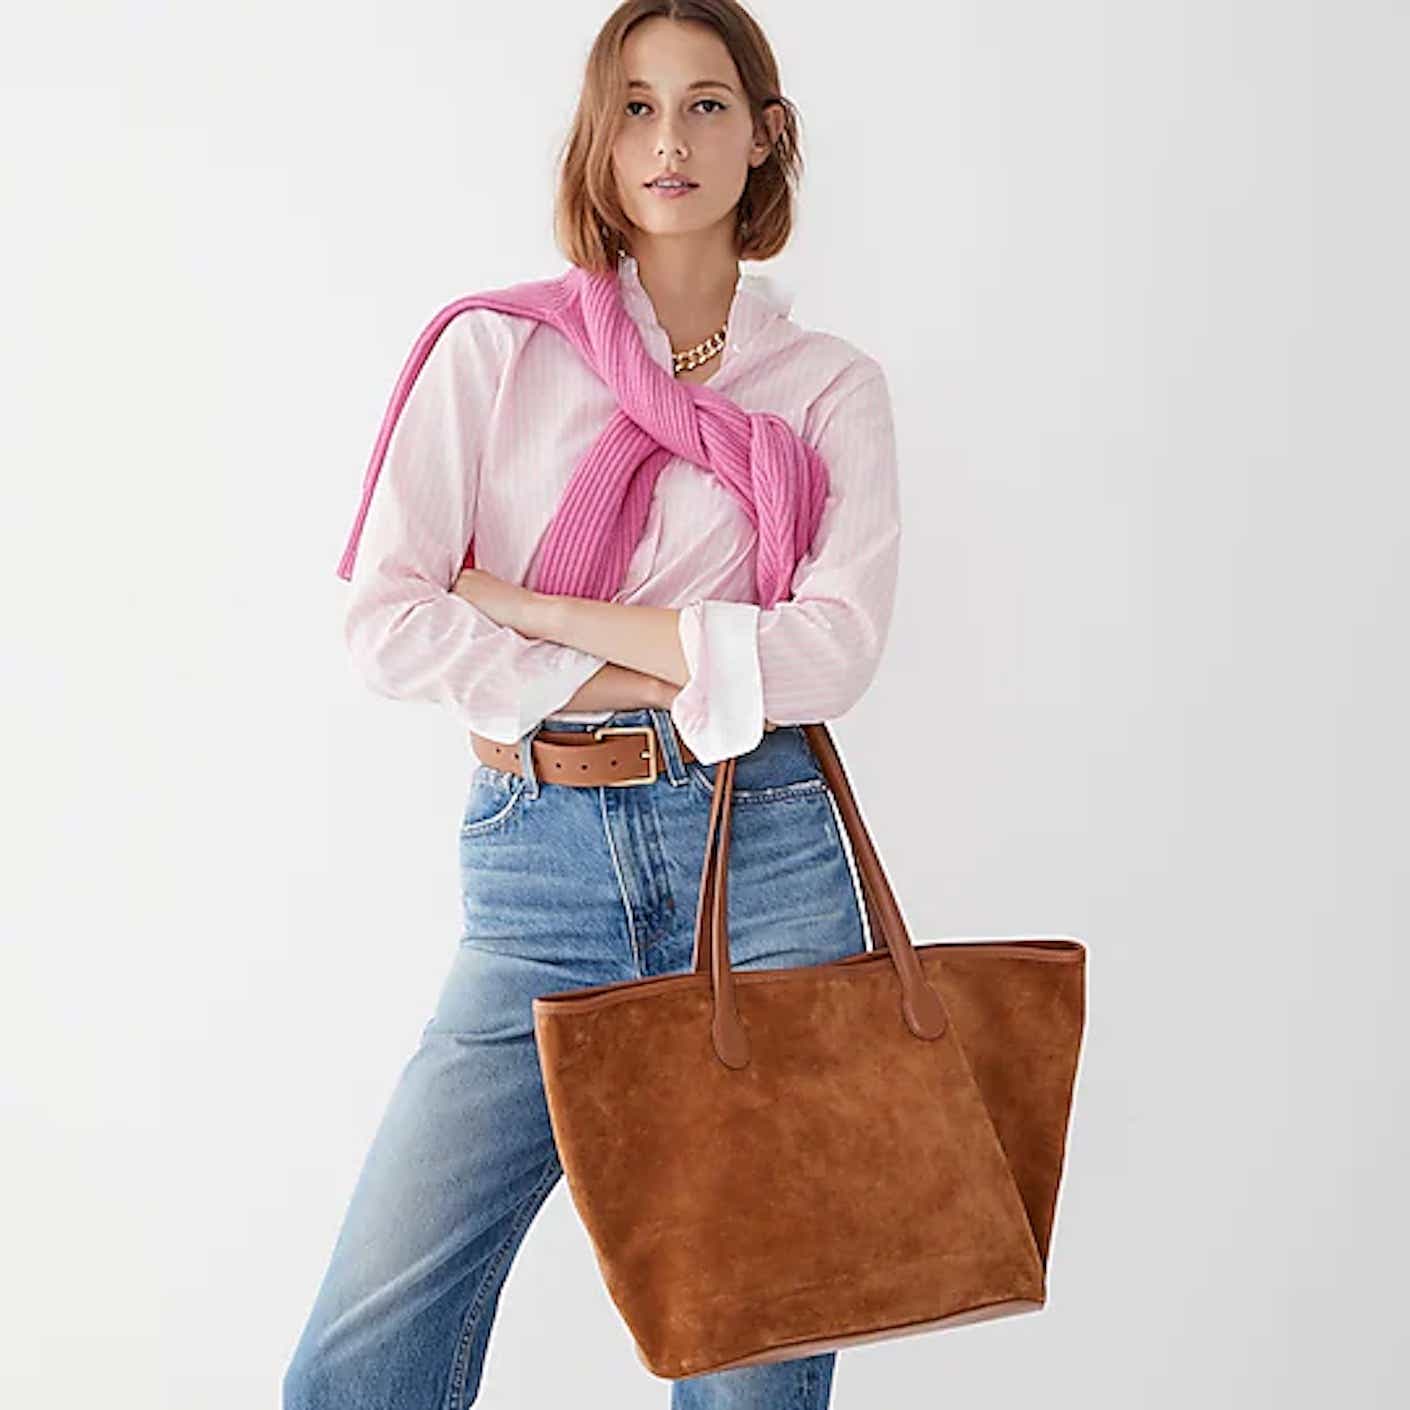 A woman wears a preppy outfit while holding a big, suede brown tote bag.